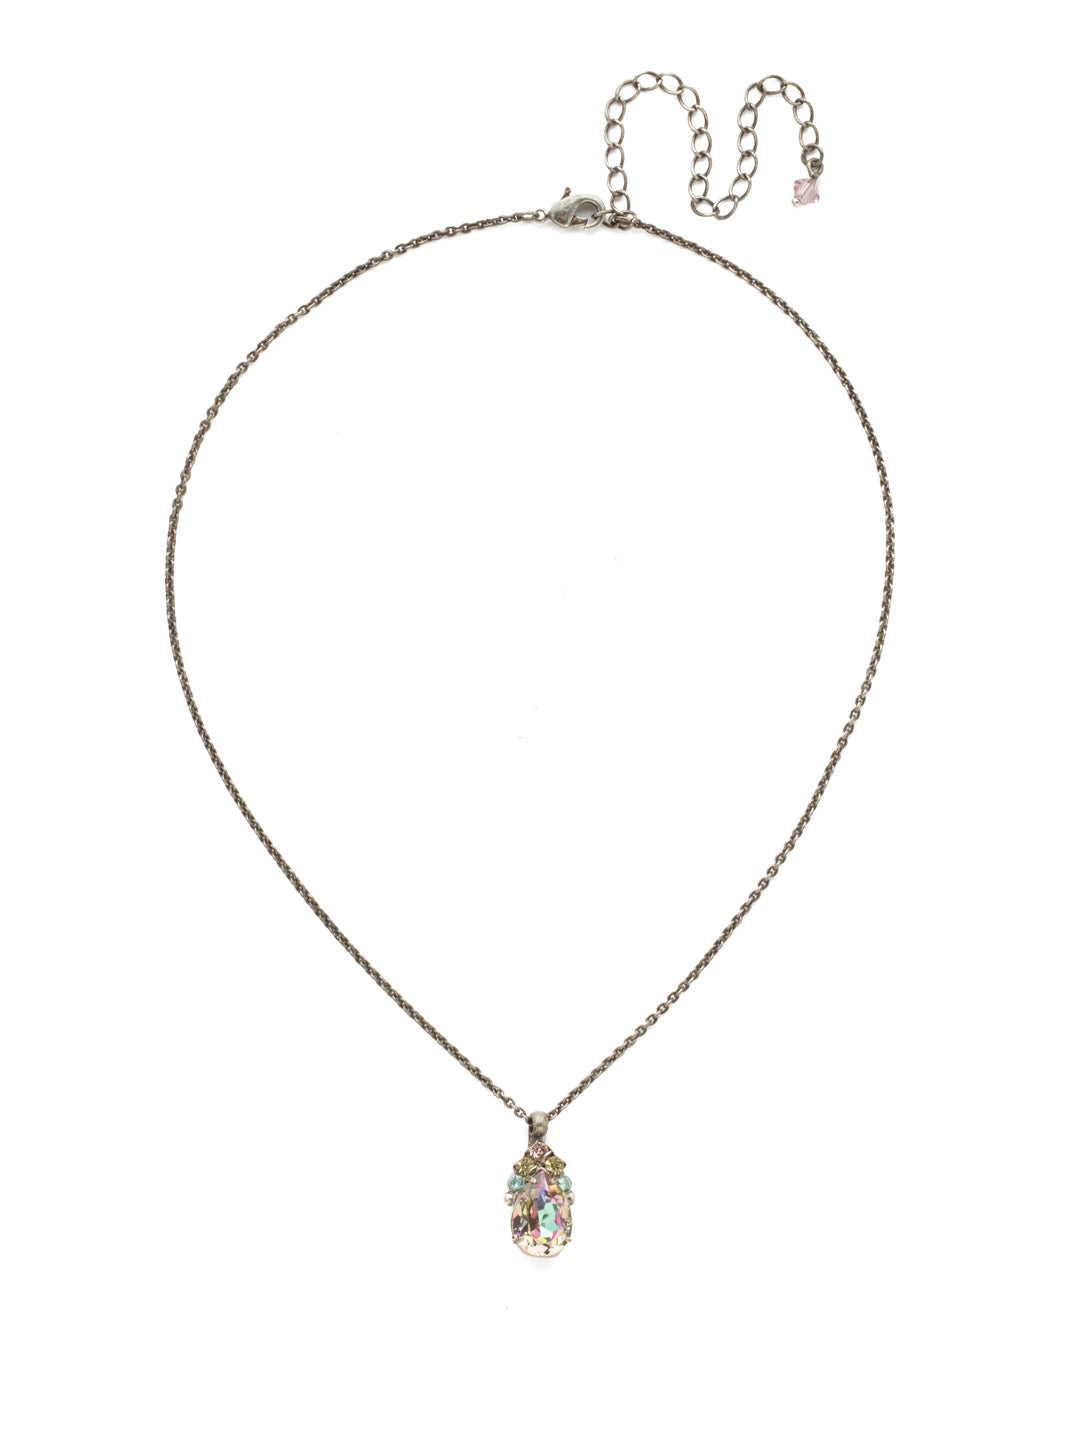 Timeless Tiara Necklace - NDQ44ASLPA - A delicate teardrop pendant sprinkled with dainty details on top. From Sorrelli's Lilac Pastel collection in our Antique Silver-tone finish.